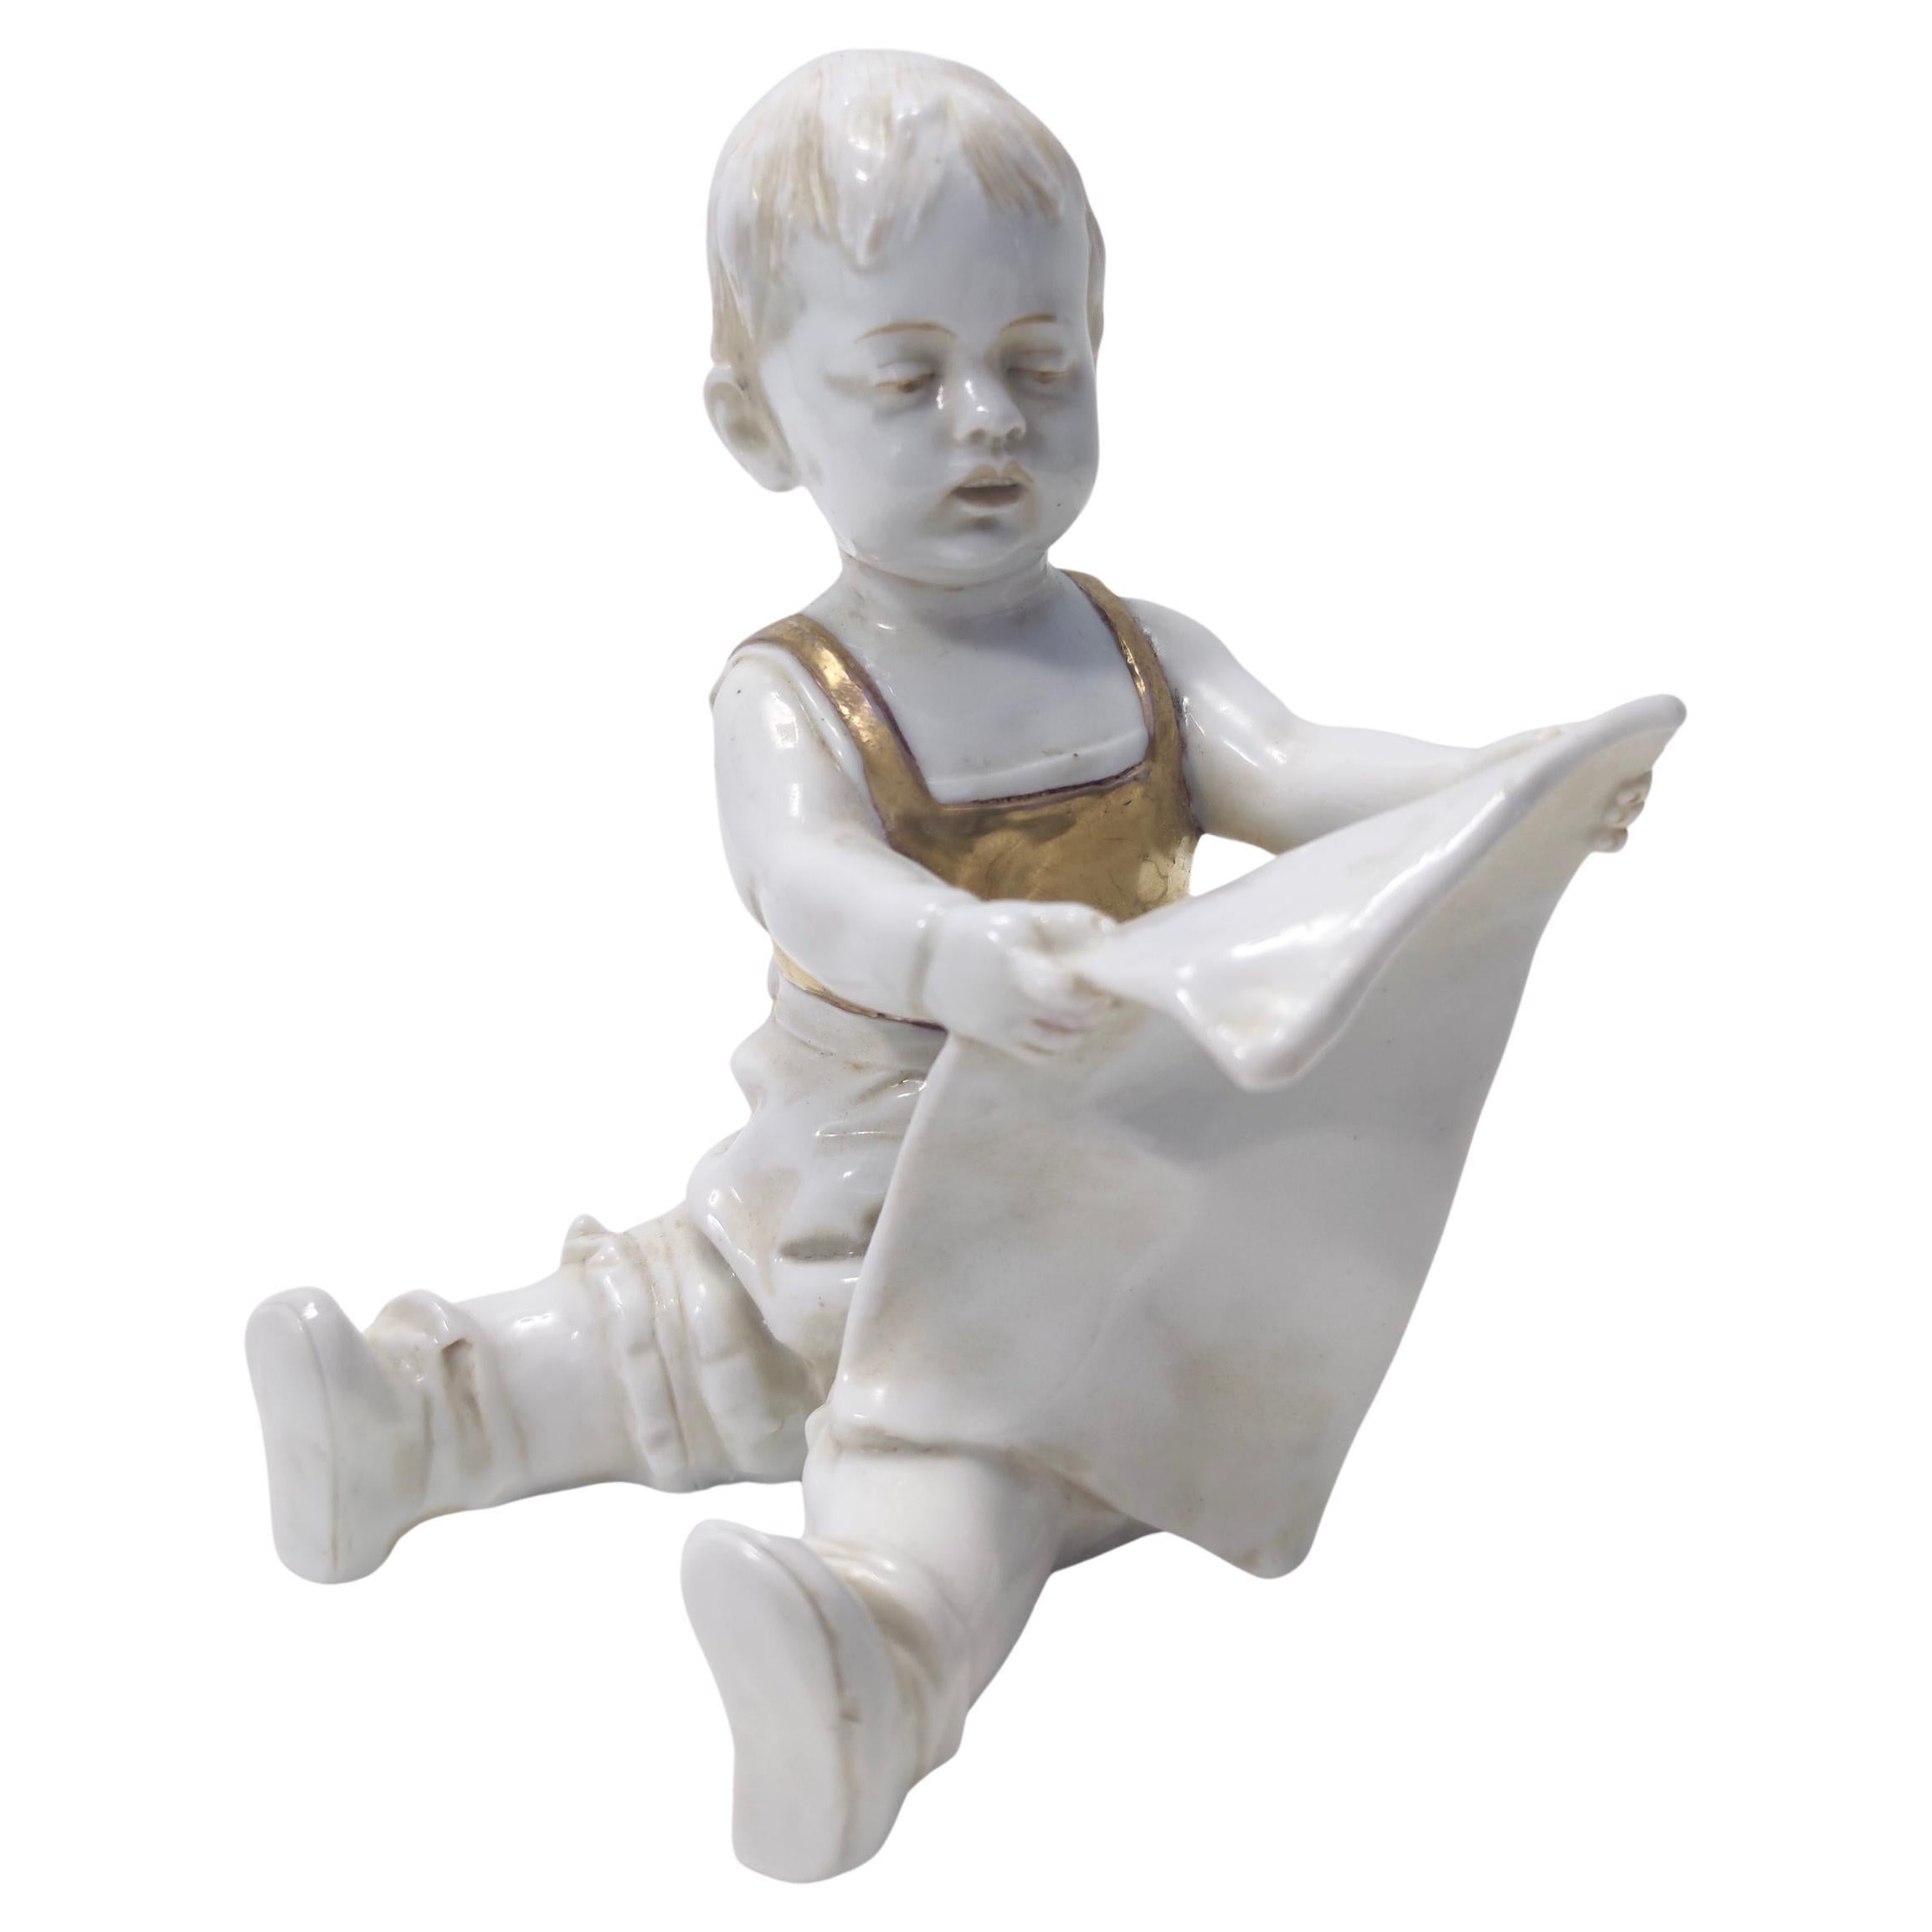 Vintage Capodimonte Ceramic and Gold Decorative Item of a Reading Child, Italy